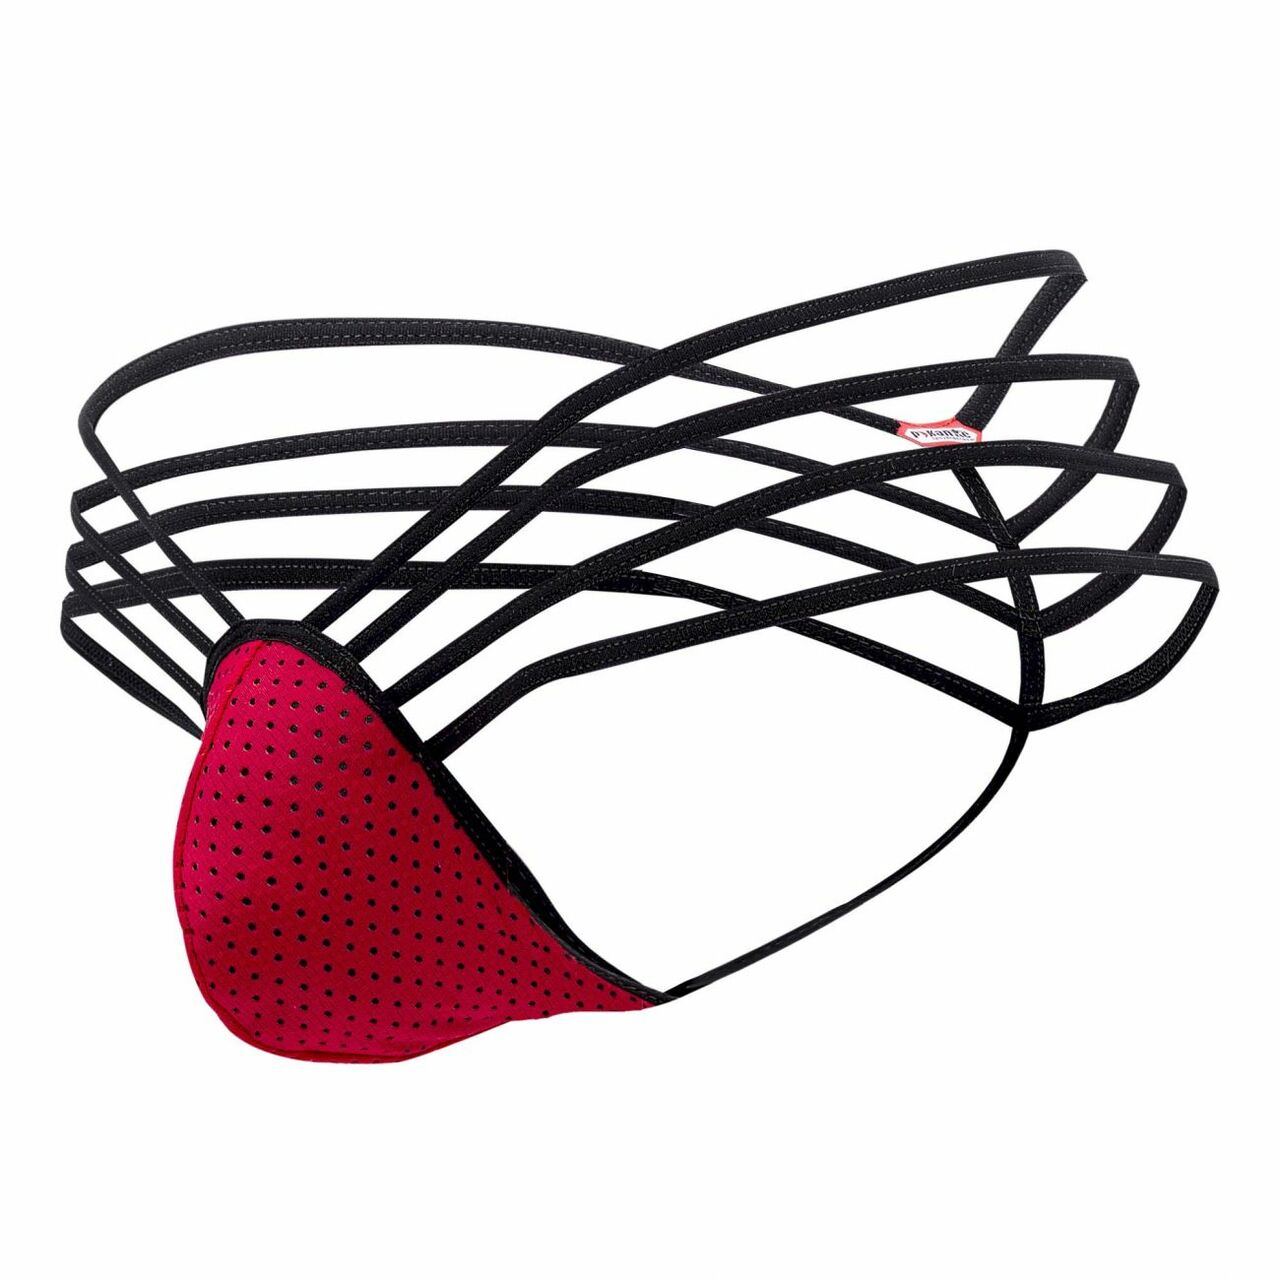 SALE - Mens Pikante Underwear Strappy G string Thong Red